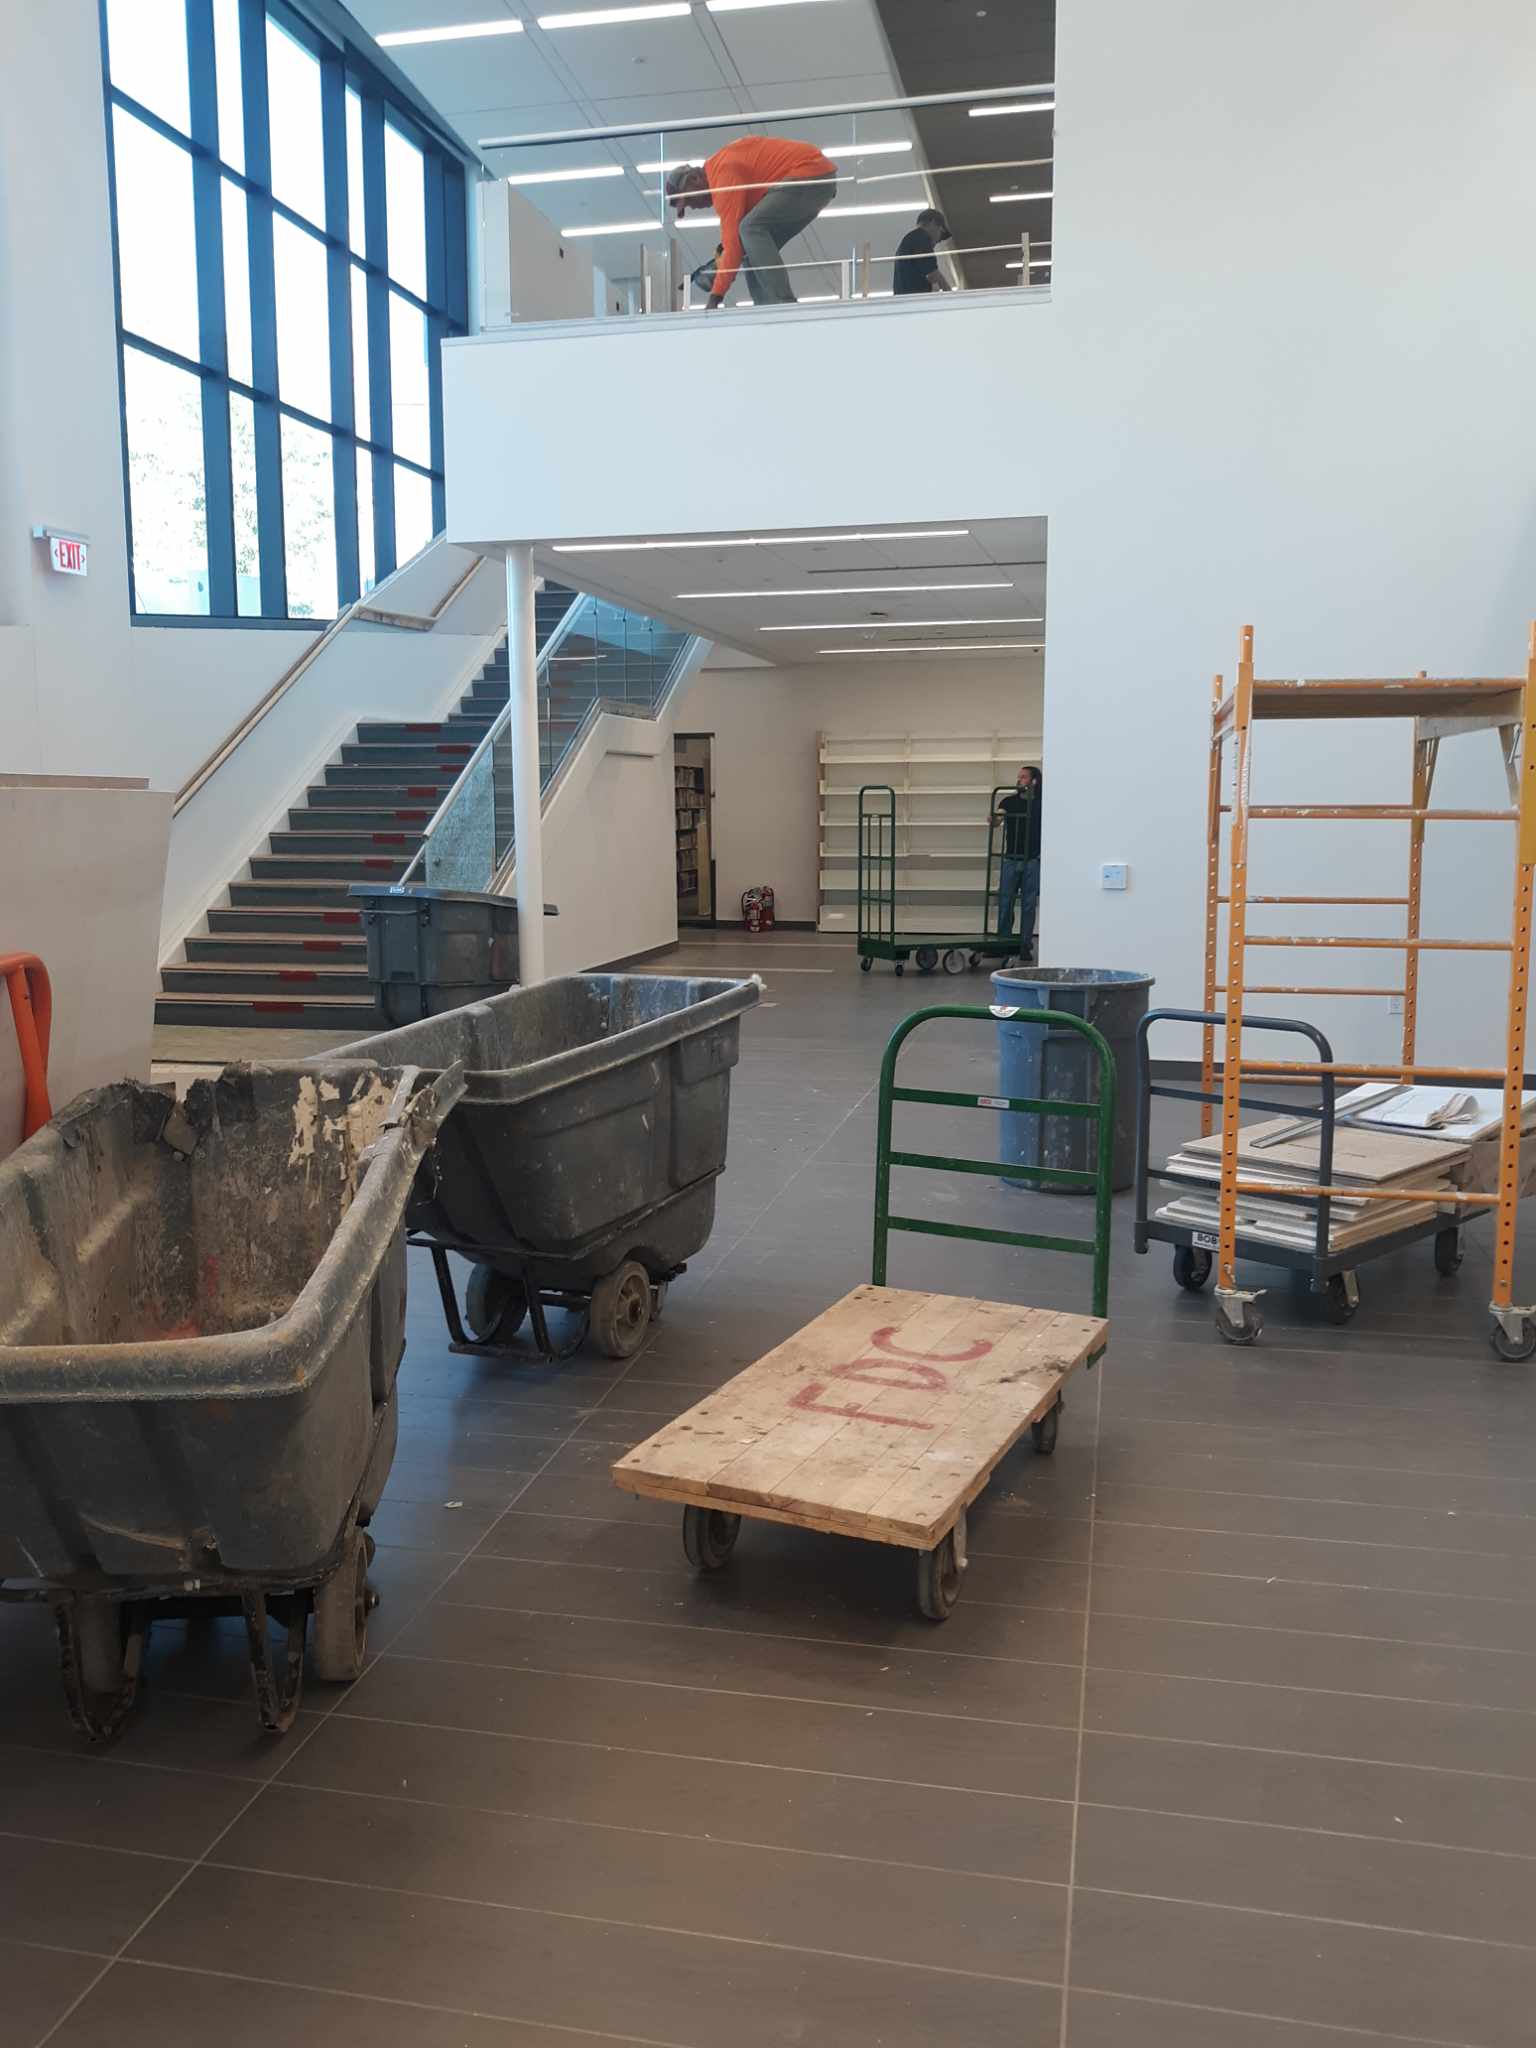 Construction happening on the first floor near the stairs and elevator.